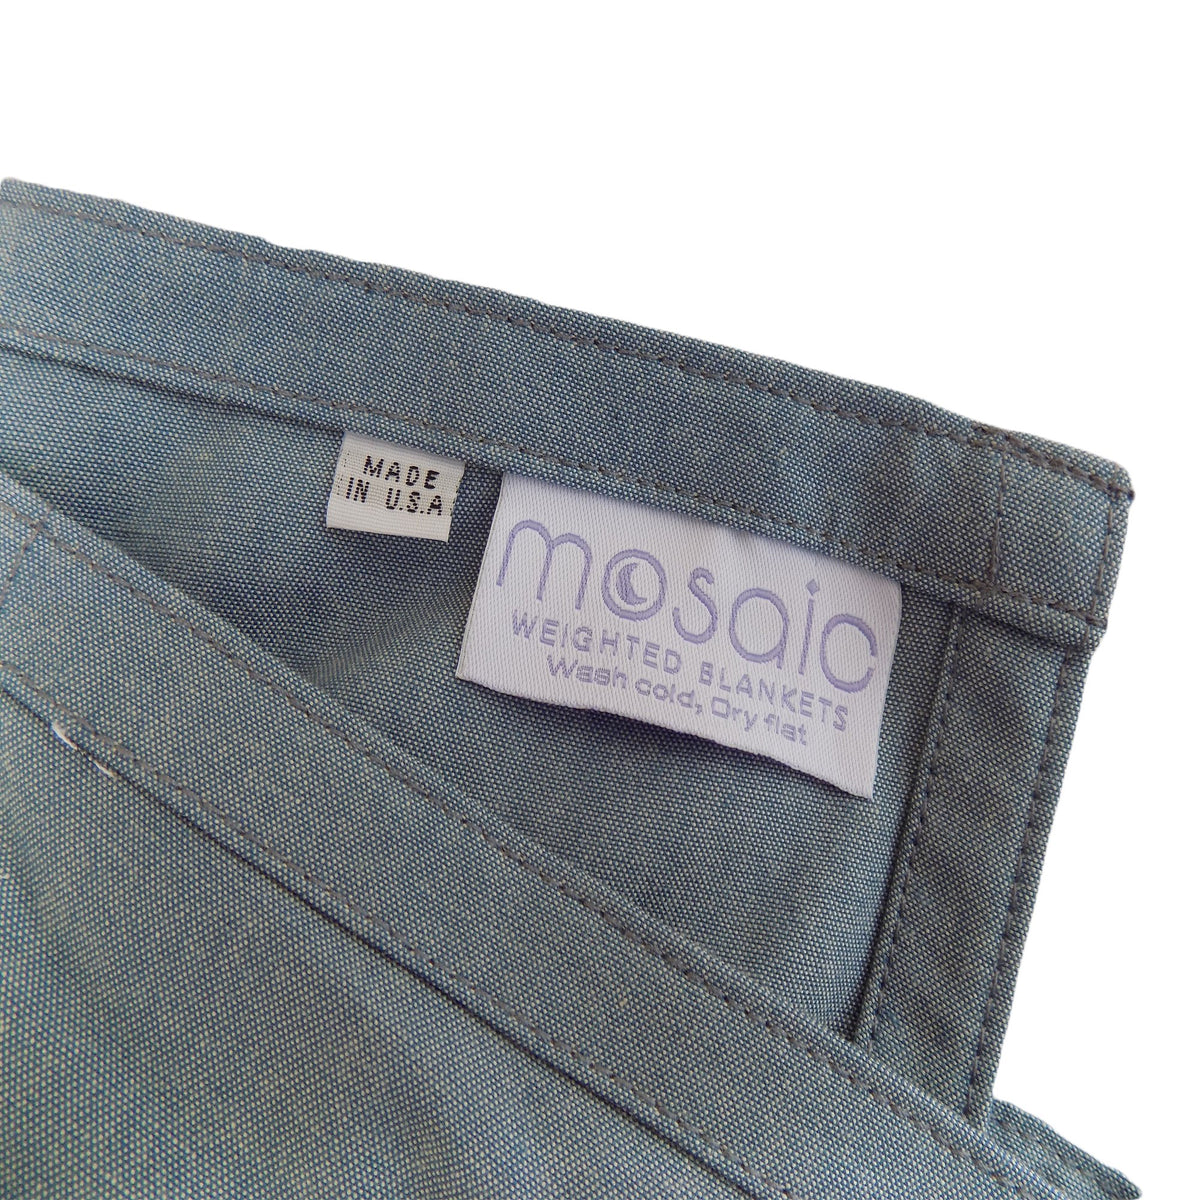 Close up of Mosaic Weighted Blankets Comfy Chambray Weighted Blanket and Made in America tags